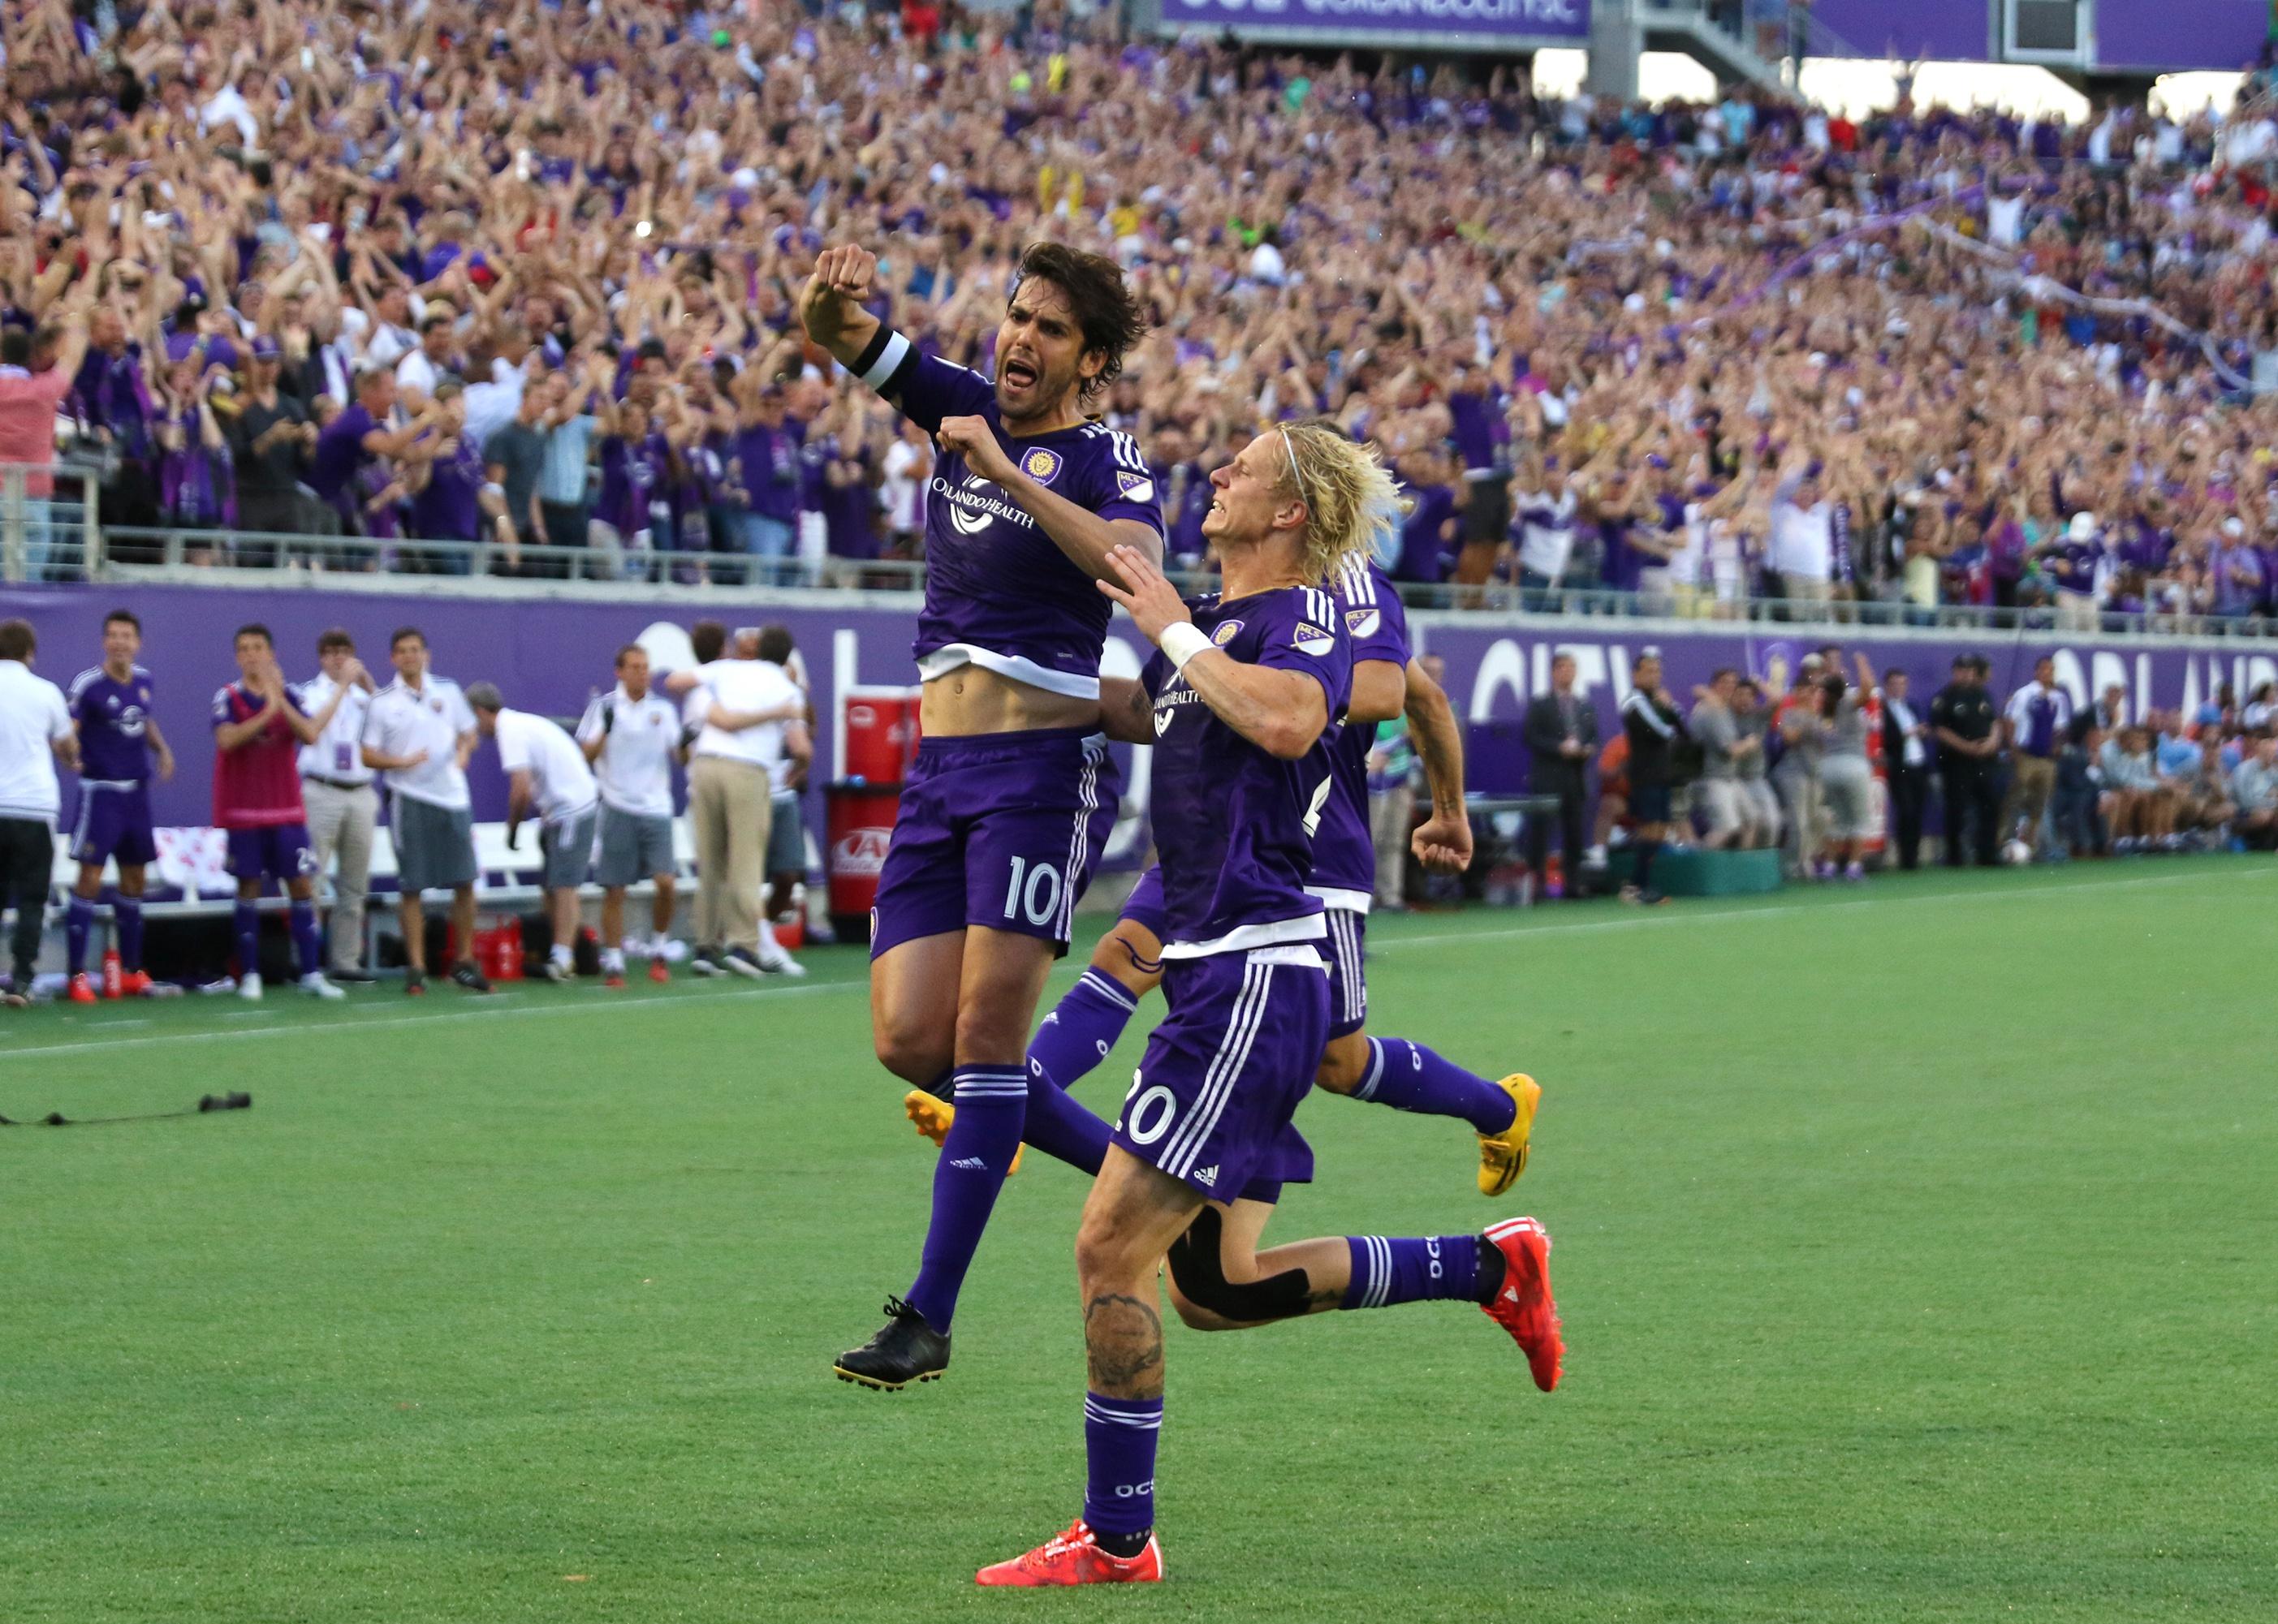 Kaka #10 celebrates after he scores the first goal in team history.